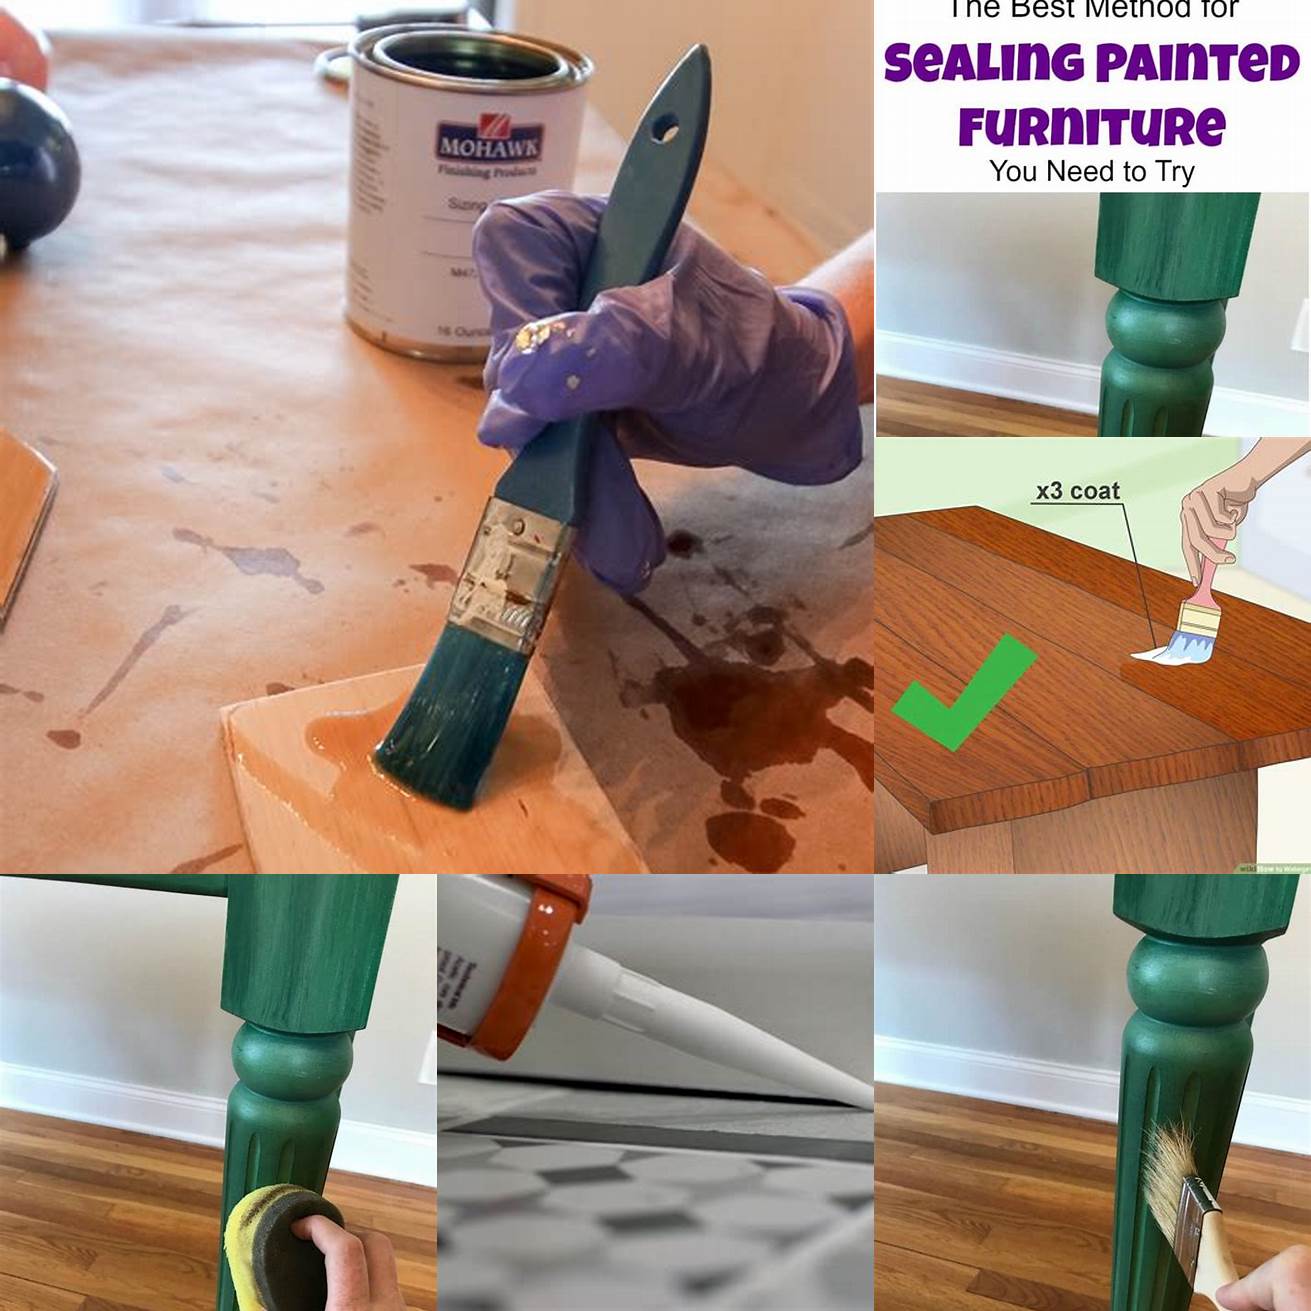 Apply sealant to protect the furniture